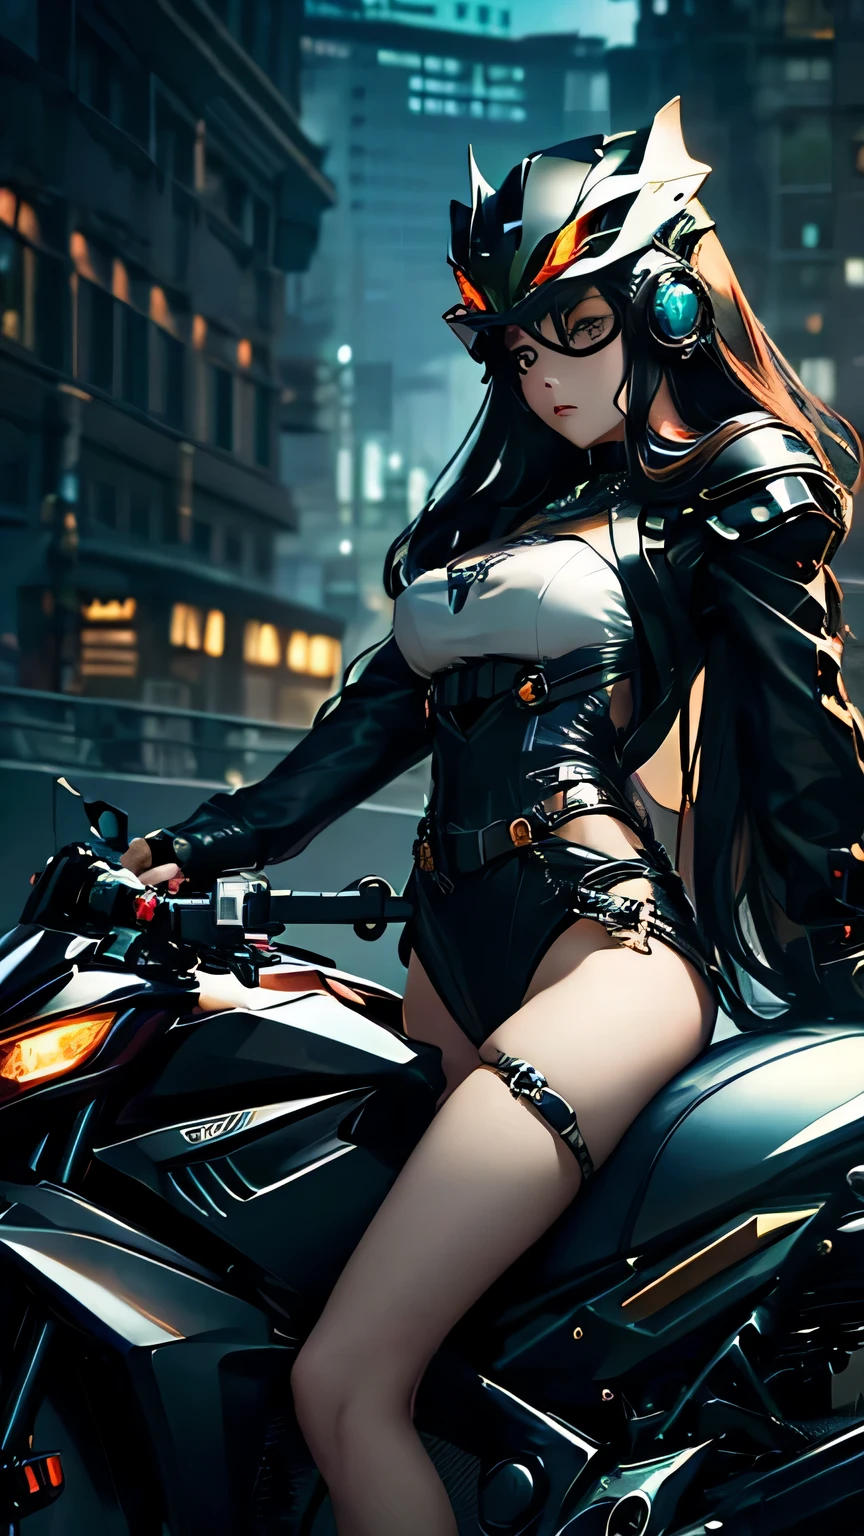 best image quality, excellent details, 超High resolution, (fidelity: 1.4), best illustrations, Favor details, 1girls high concentration, (With a delicate and beautiful face), dressed in black and white mecha, Wearing a mecha helmet, Have a direction controller, ((ride a mechanical bike)), the background is a high-tech lighting scene of the futuristic city. masterpiece, 最high quality, high quality, High resolution, (portrait)